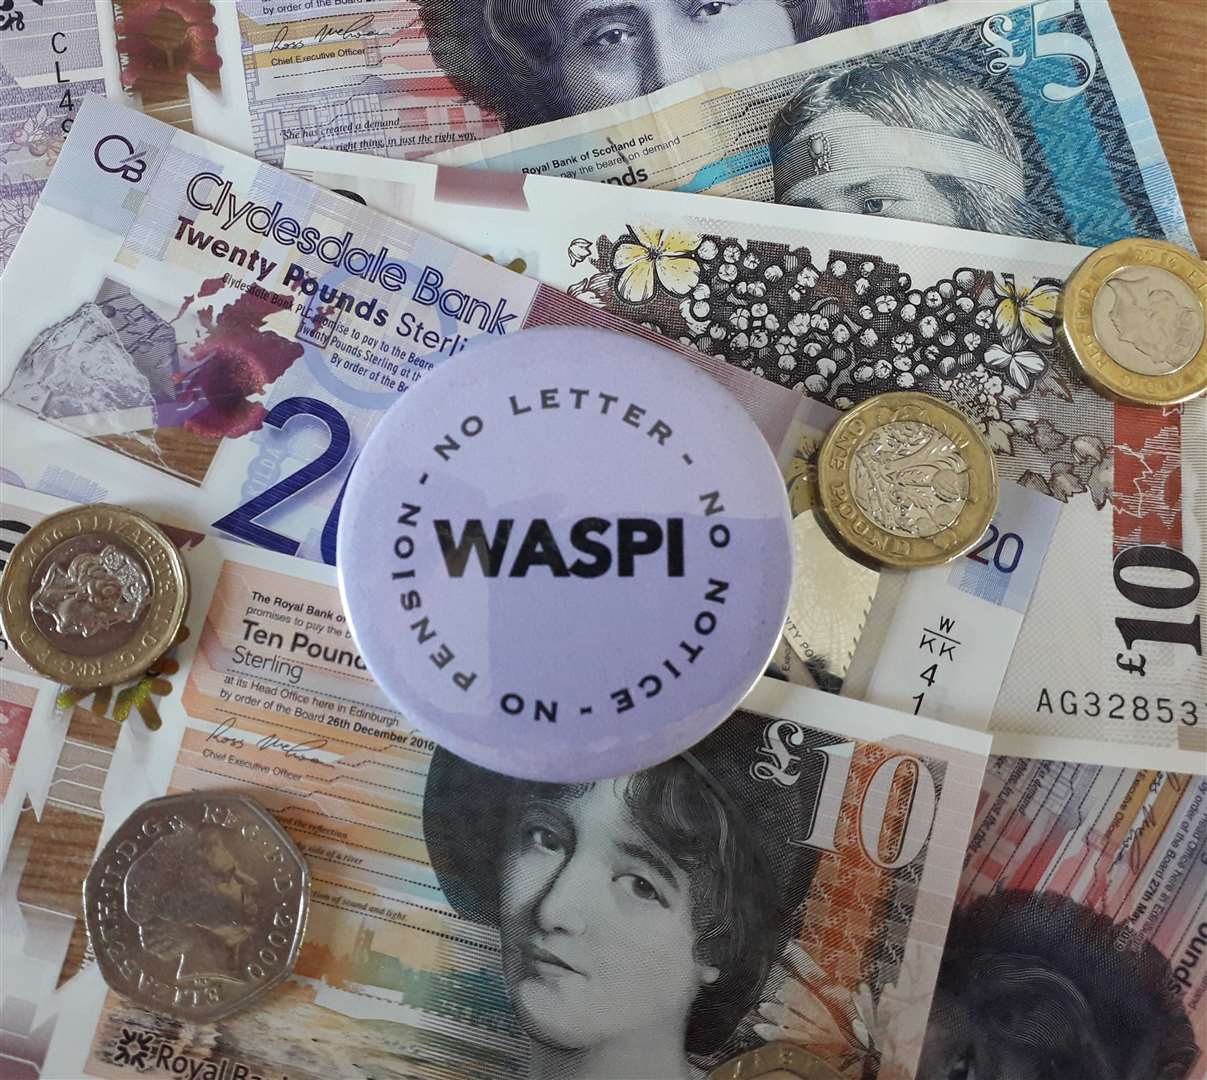 WASPI is campaigning to achieve fair transitional pension arrangements for those women affected by the changes.